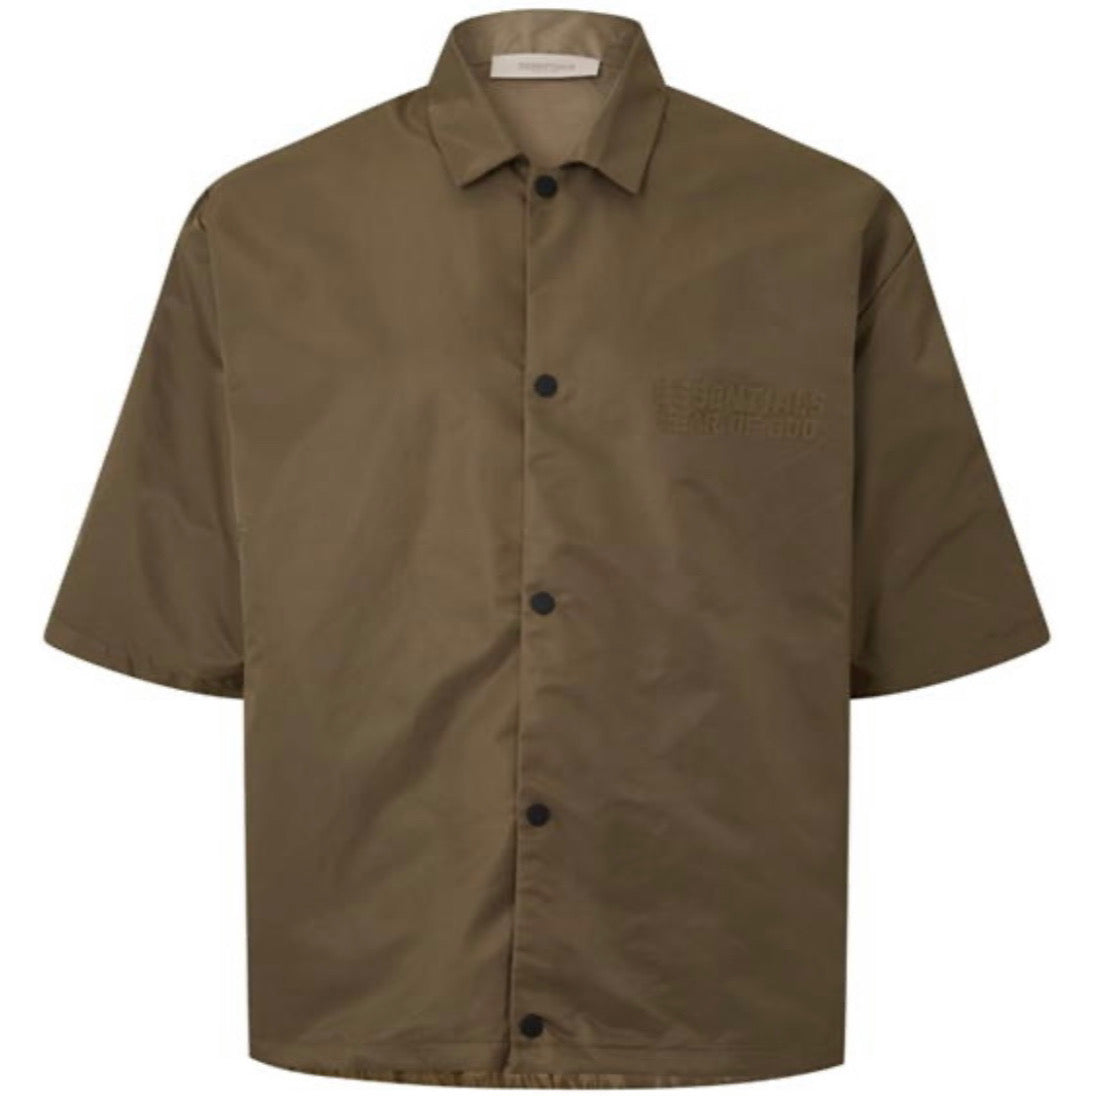 FEAR OF GOD Short Sleeve Button Up ノーカラー - トップス